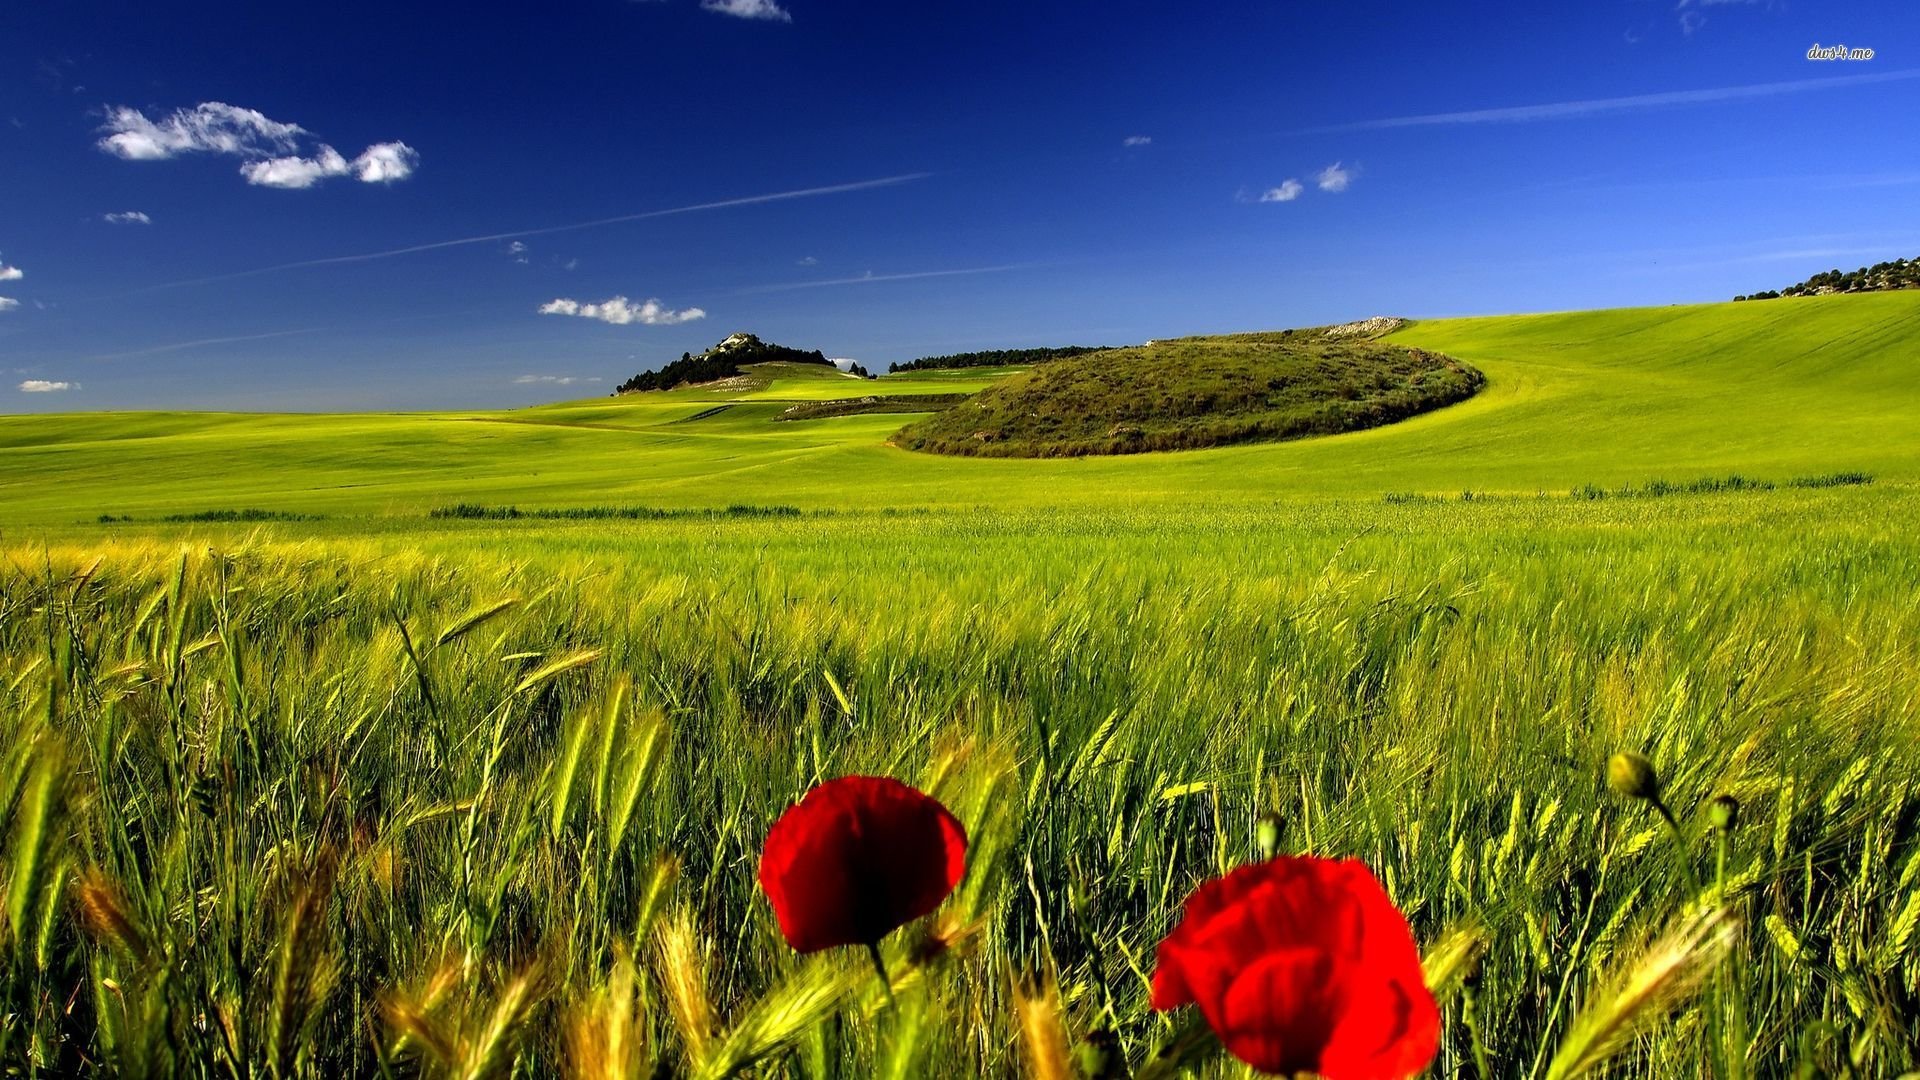 20595 poppies in the green wheat field 1920x1080 nature wallpaper Wallpaper